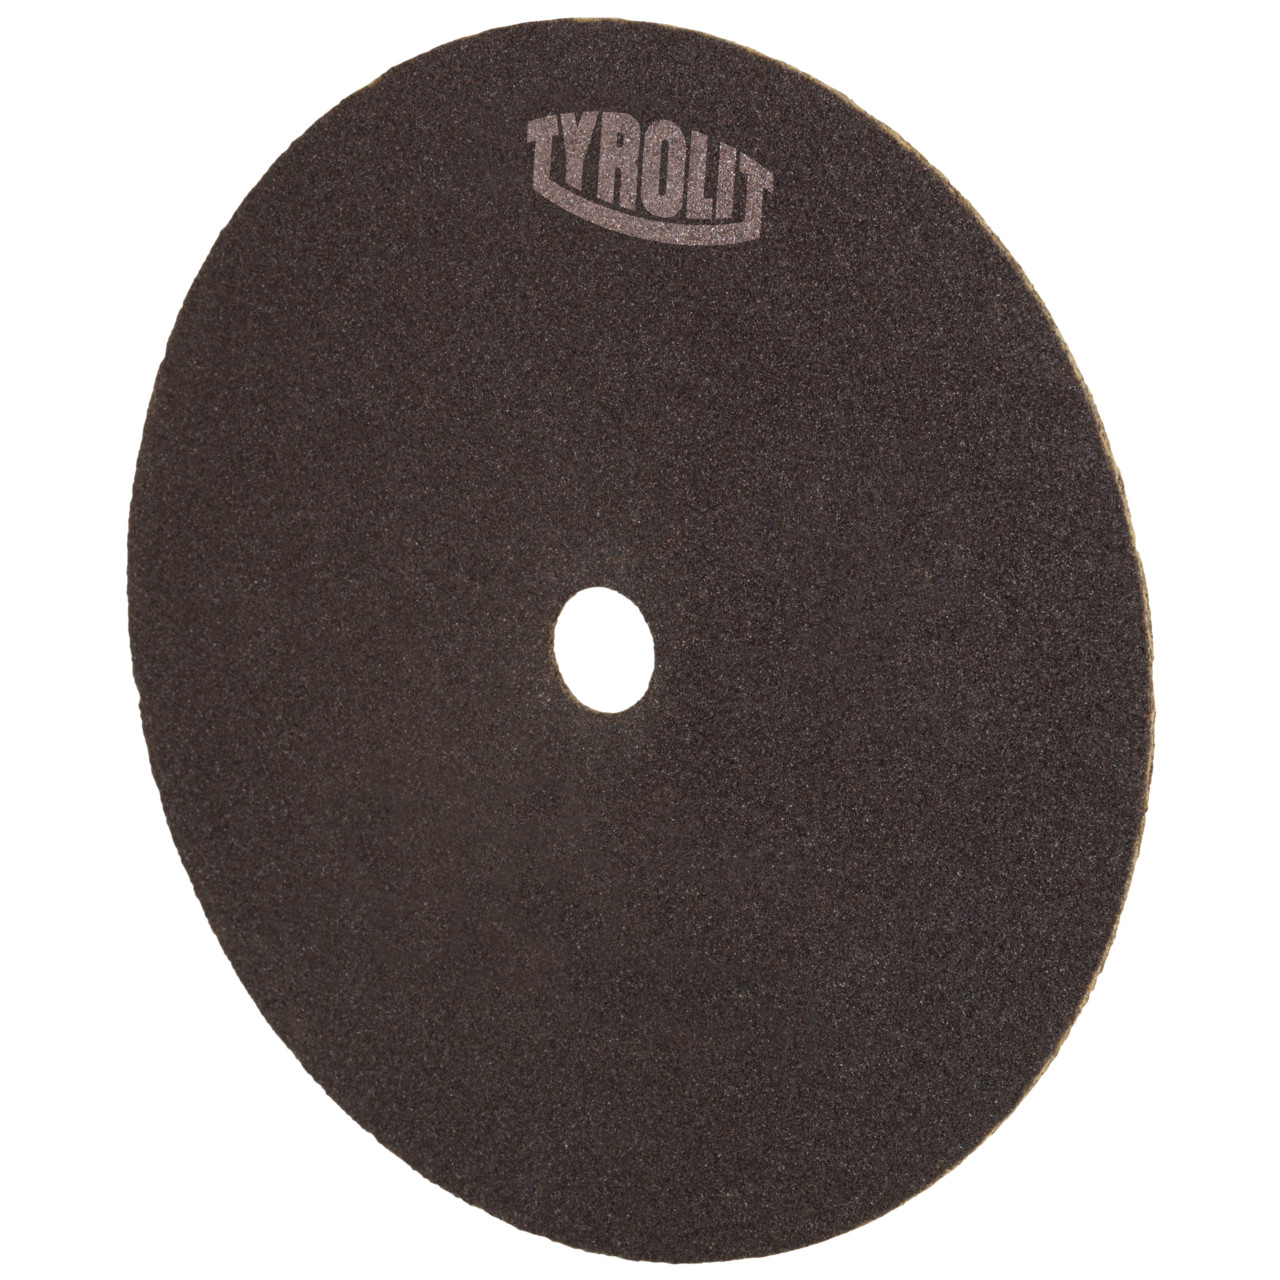 Tyrolit Cutting disc for cutting and saw sharpening DxDxH 200x2x32 For steel and HSS, shape: 41N - straight version (non-woven cutting disc), Art. 96205